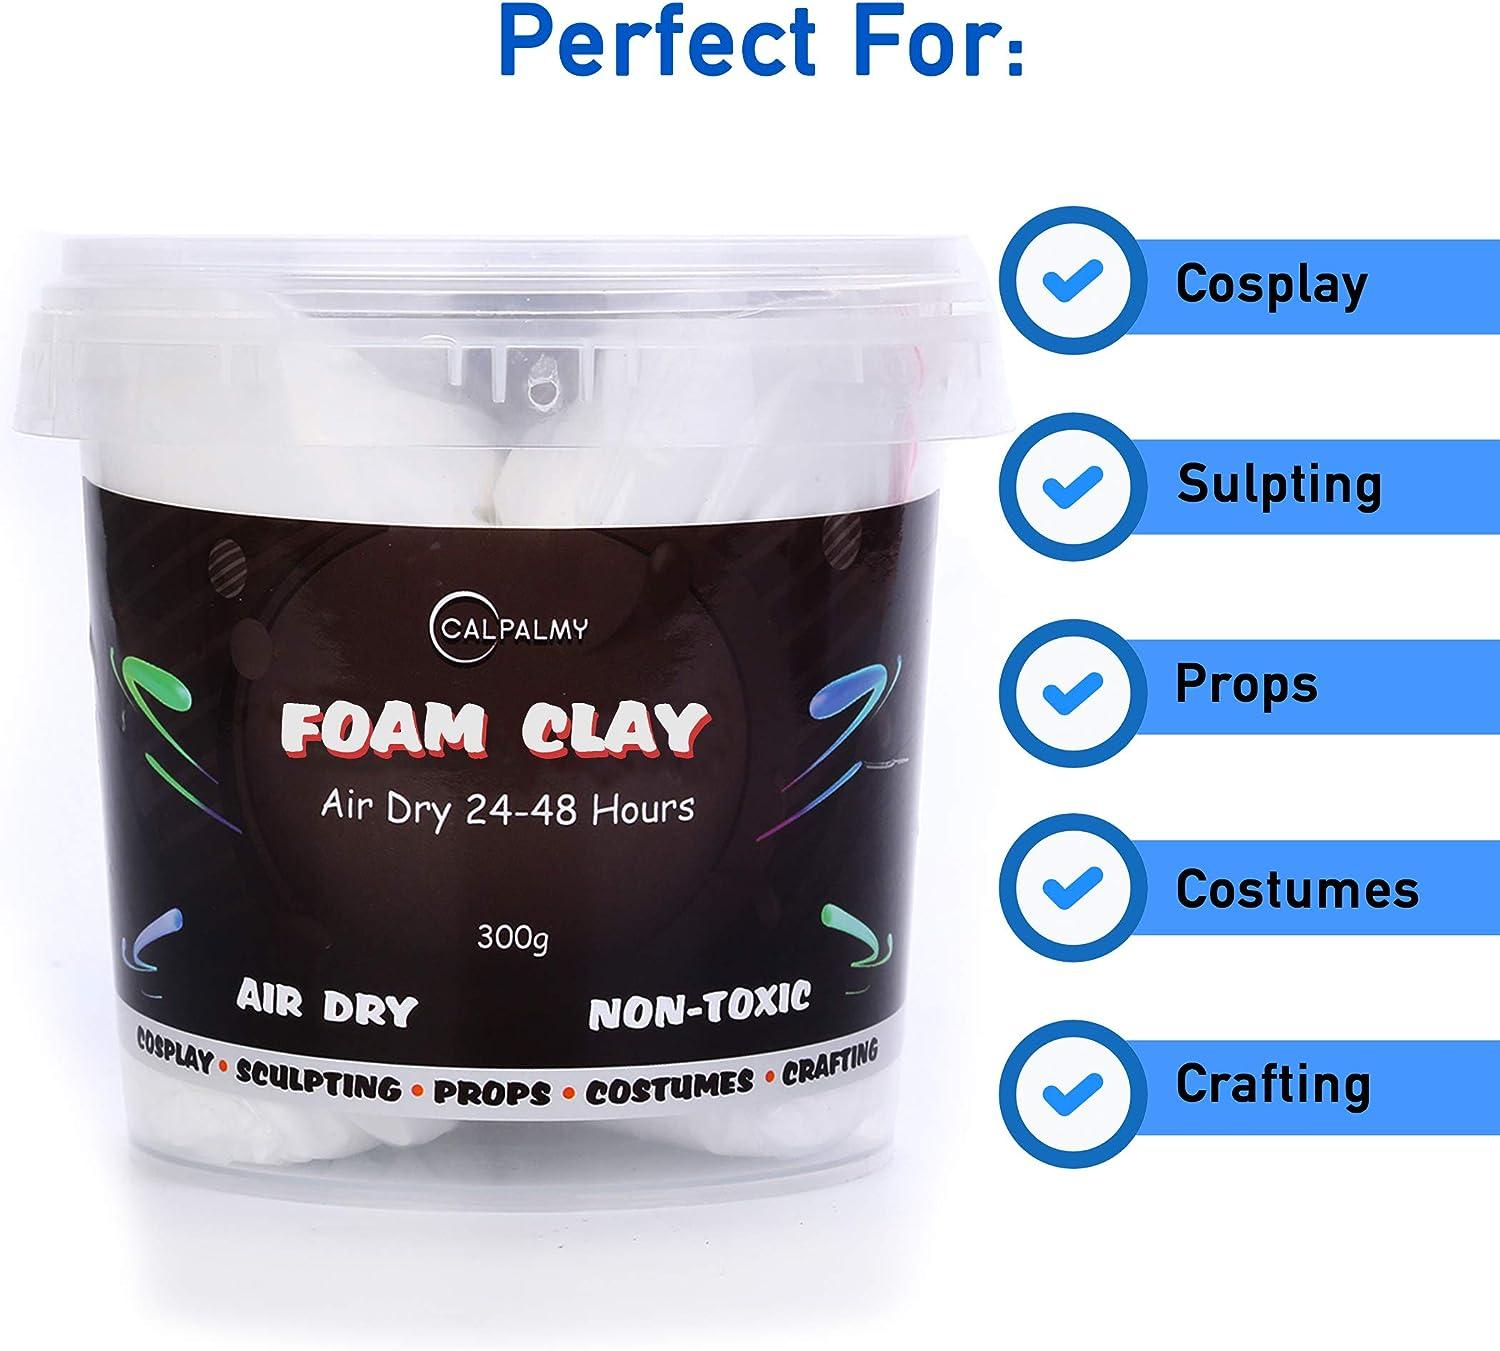 Moldable Cosplay Foam Clay (Black) – High Density and Hiqh Quality for  Intricate Designs | Air Dries to Perfection for Cutting with a Knife or  Rotary